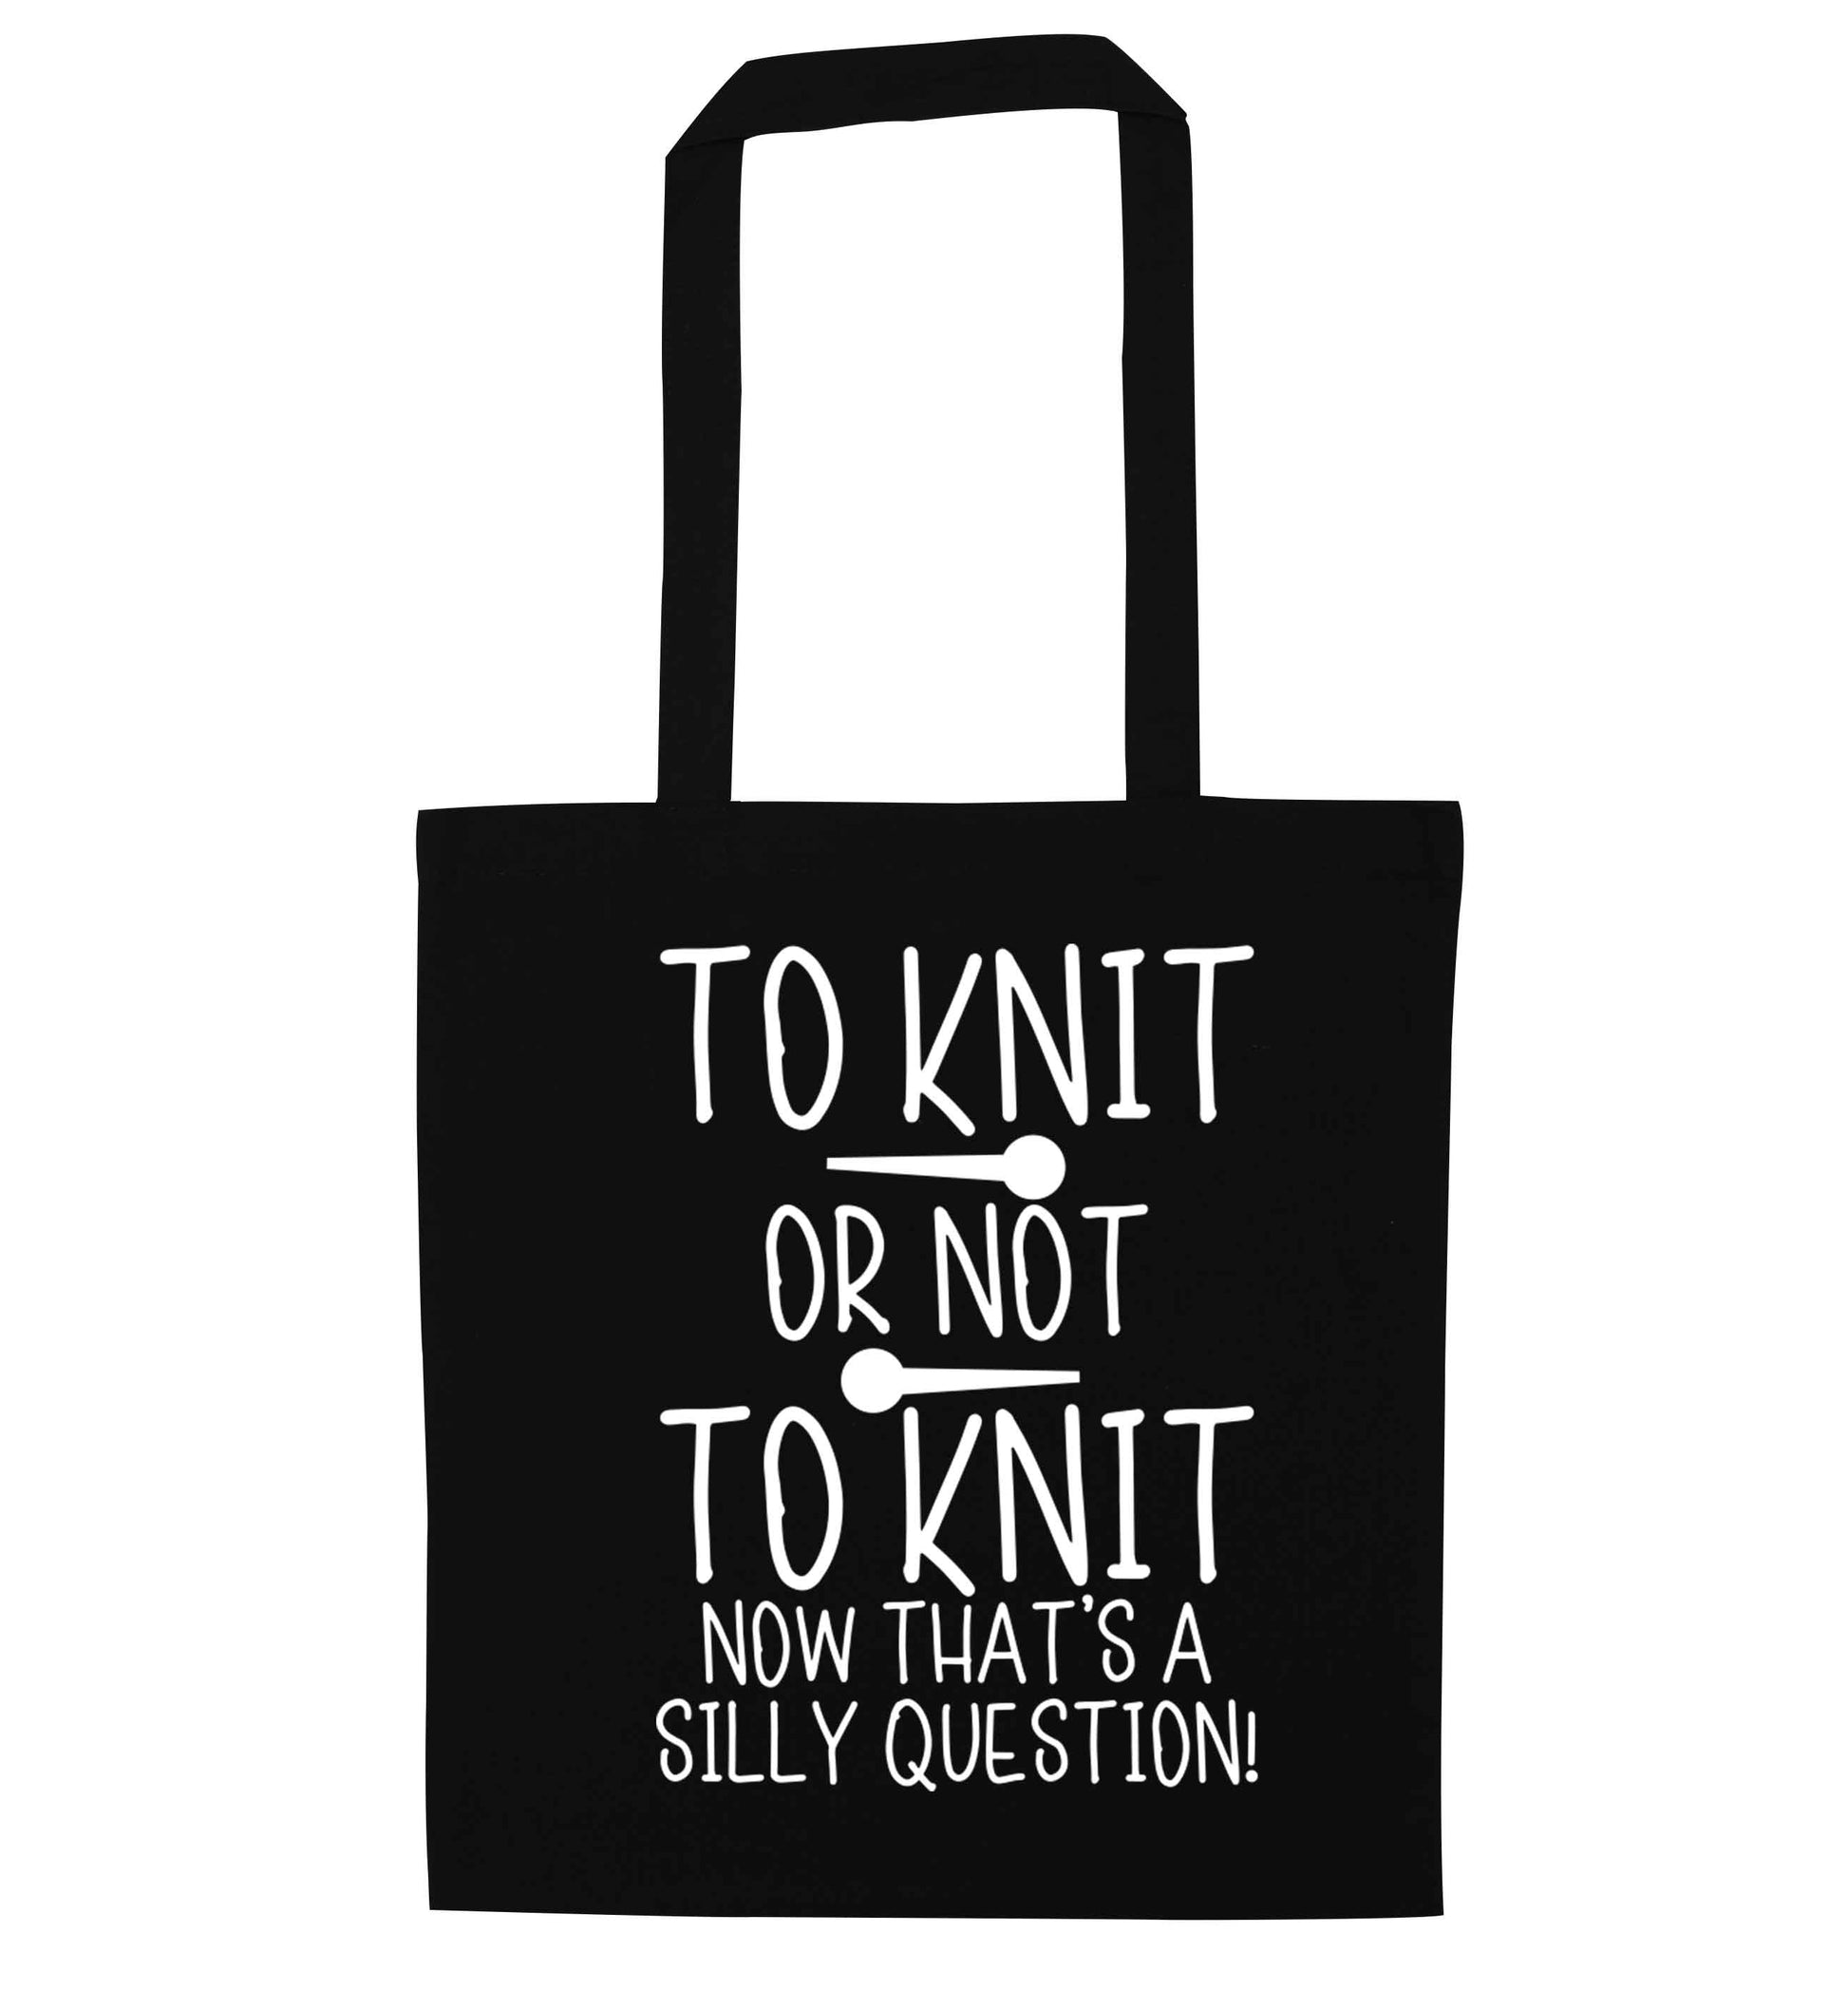 To knit or not to knit now that's a silly question black tote bag